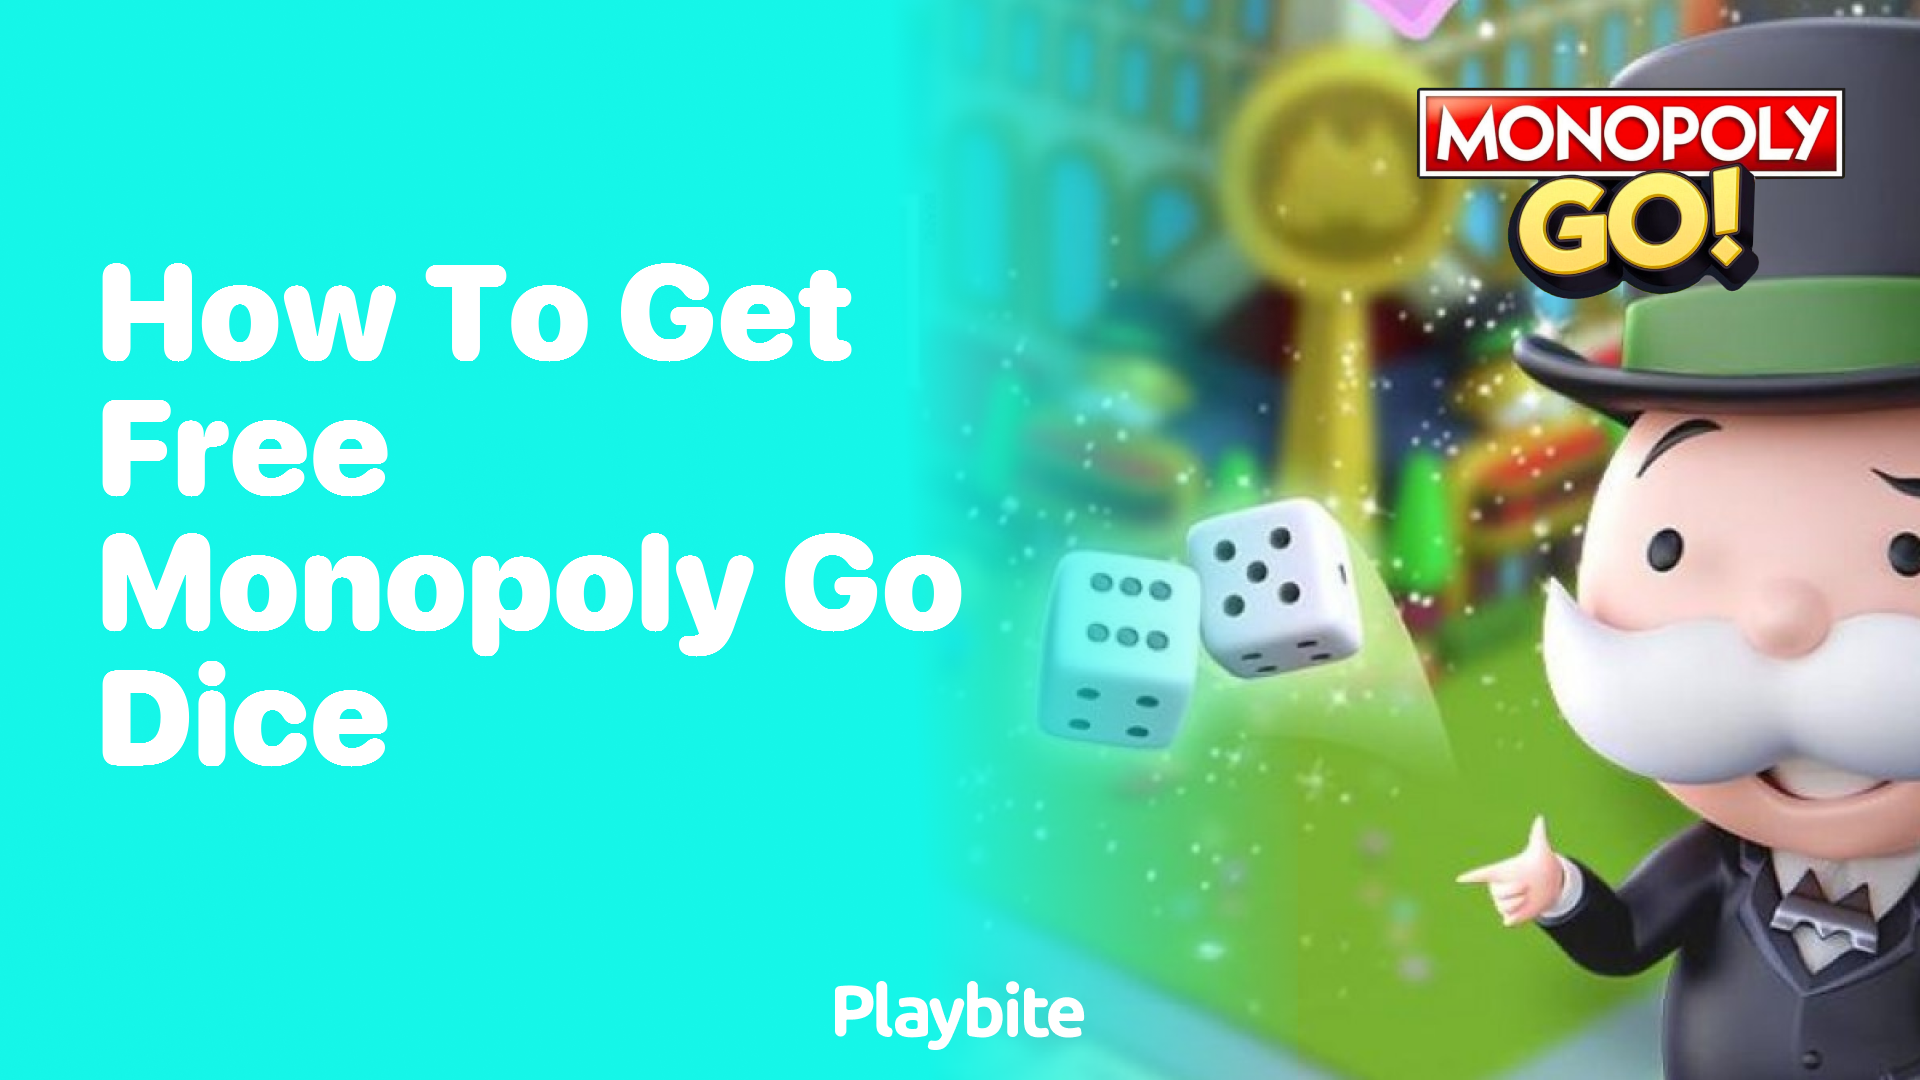 How to Get Free Monopoly Go Dice